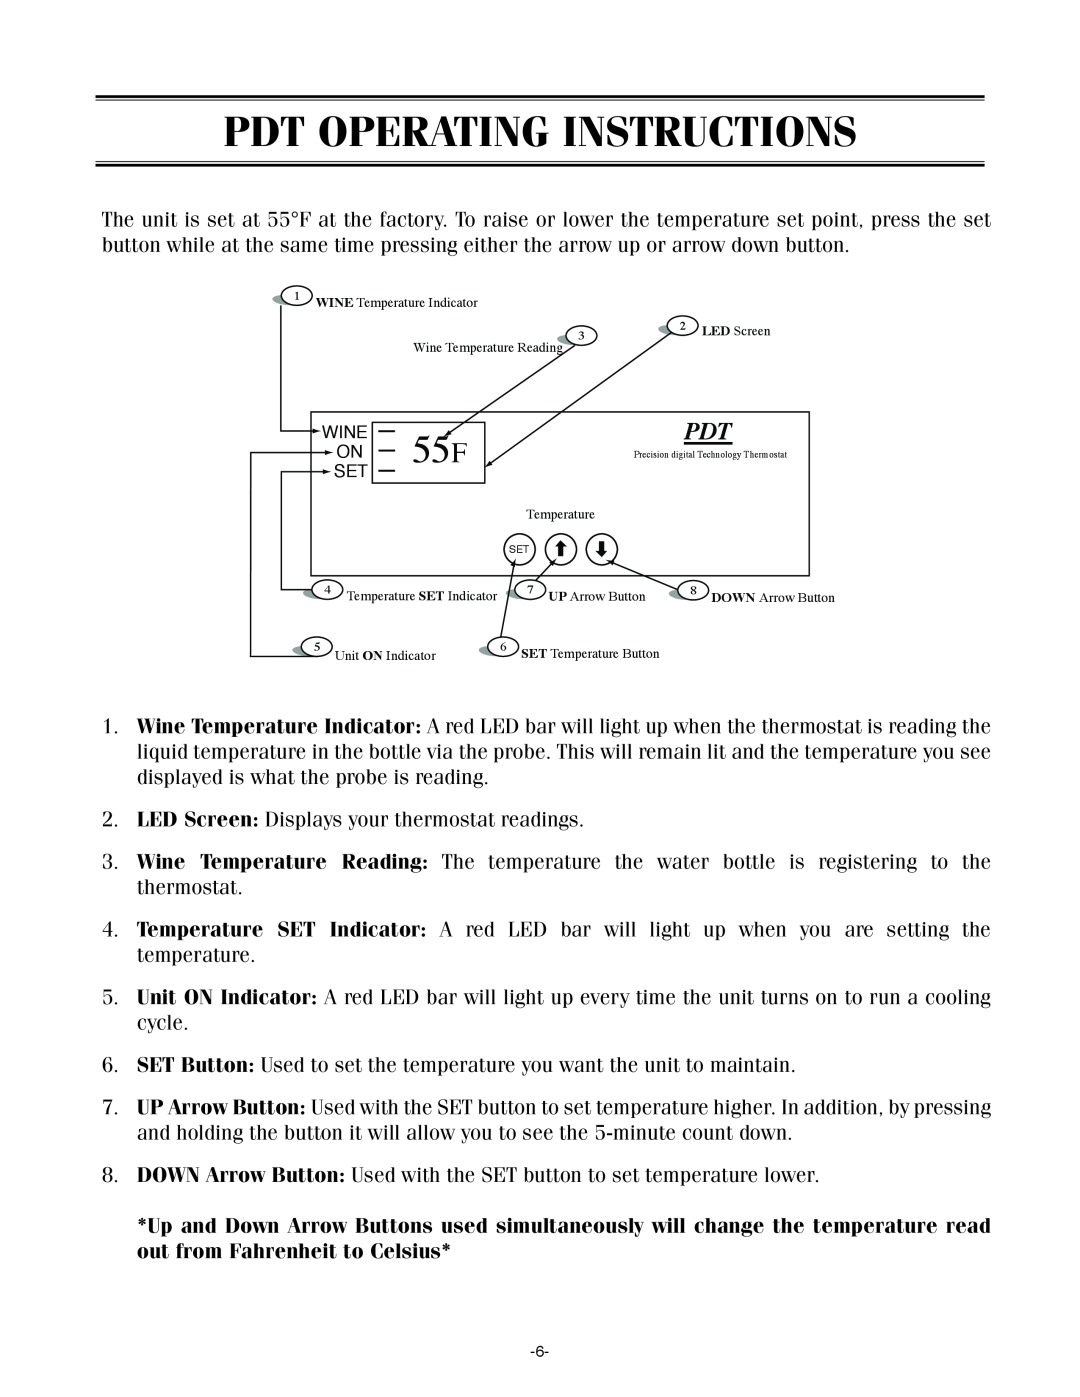 WhisperKool SS4000, SS7000 owner manual Pdt Operating Instructions 